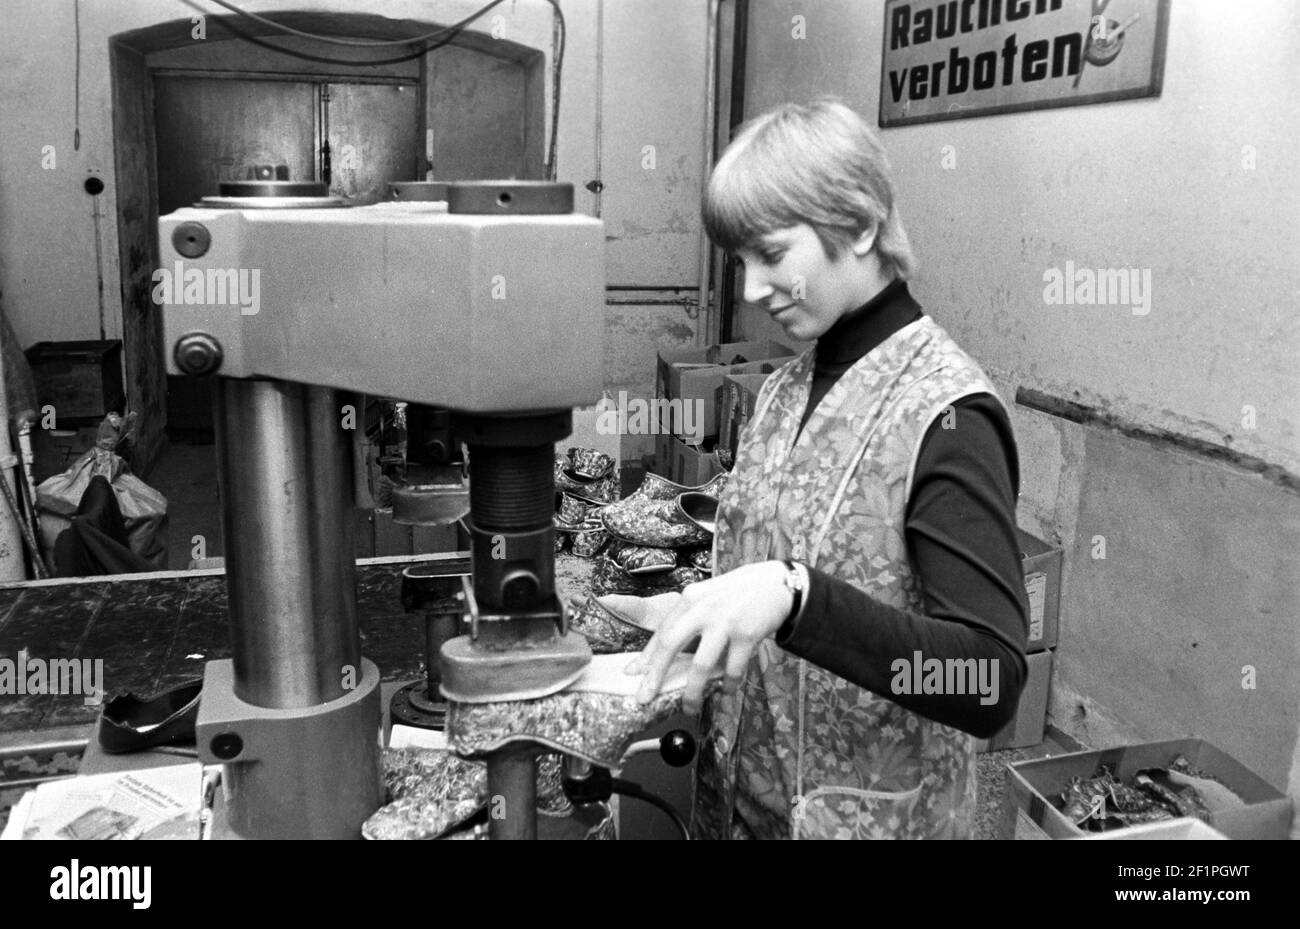 30 November 1981, Saxony, Delitzsch: Slippers for men and women are produced in the slipper factory in Zschortau (Delitzsch district) in the early 1980s. Exact date of recording not known. Photo: Volkmar Heinz/dpa-Zentralbild/ZB Stock Photo